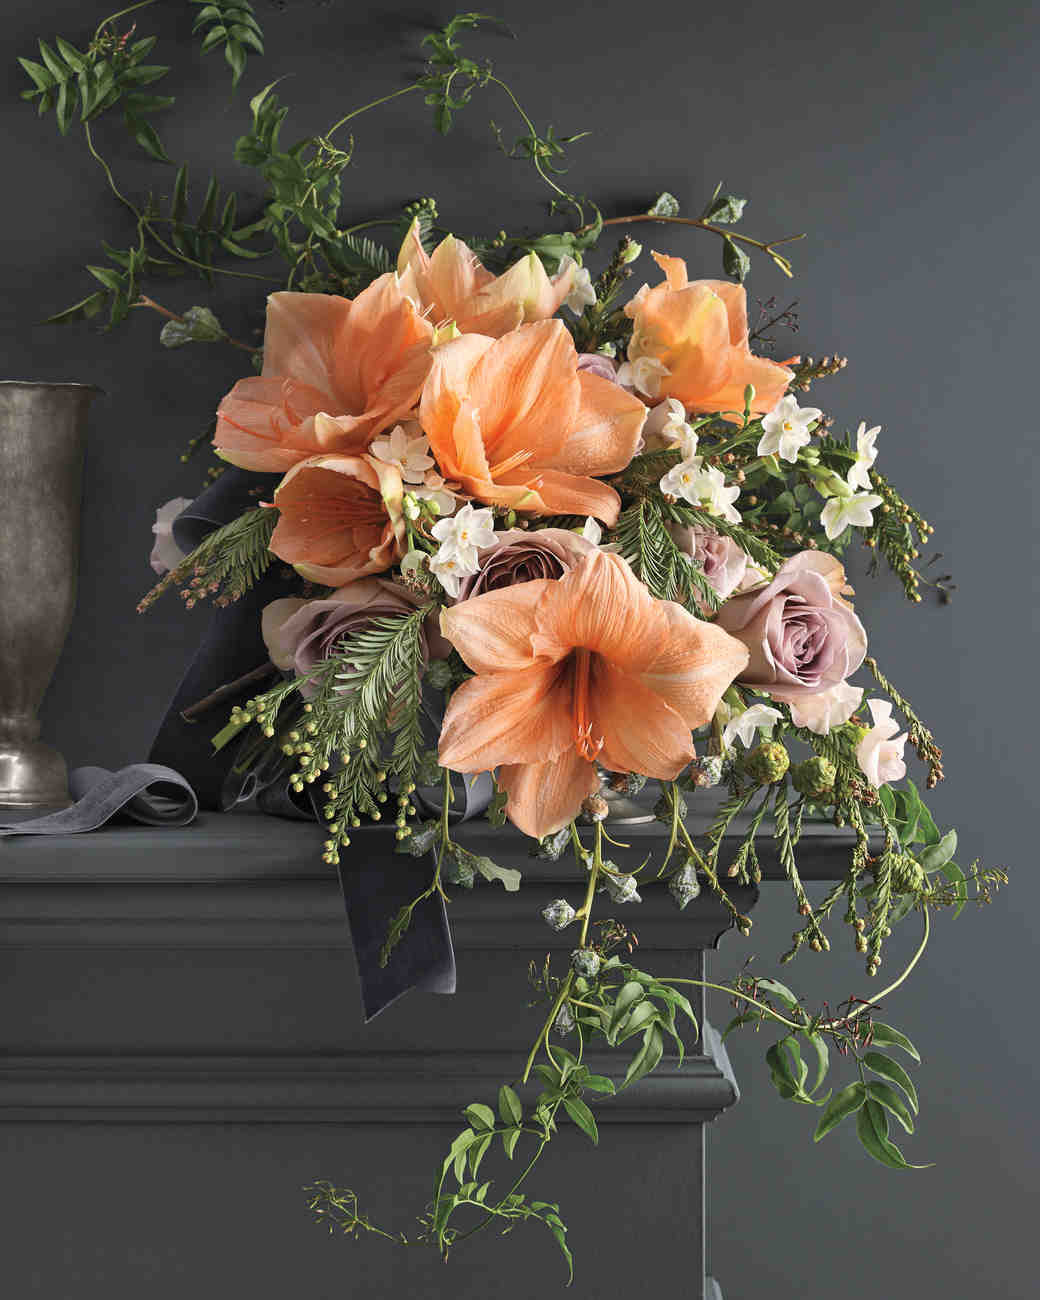 Popular Wedding Flowers
 8 Bouquets Inspired by the Most Popular Wedding Flowers